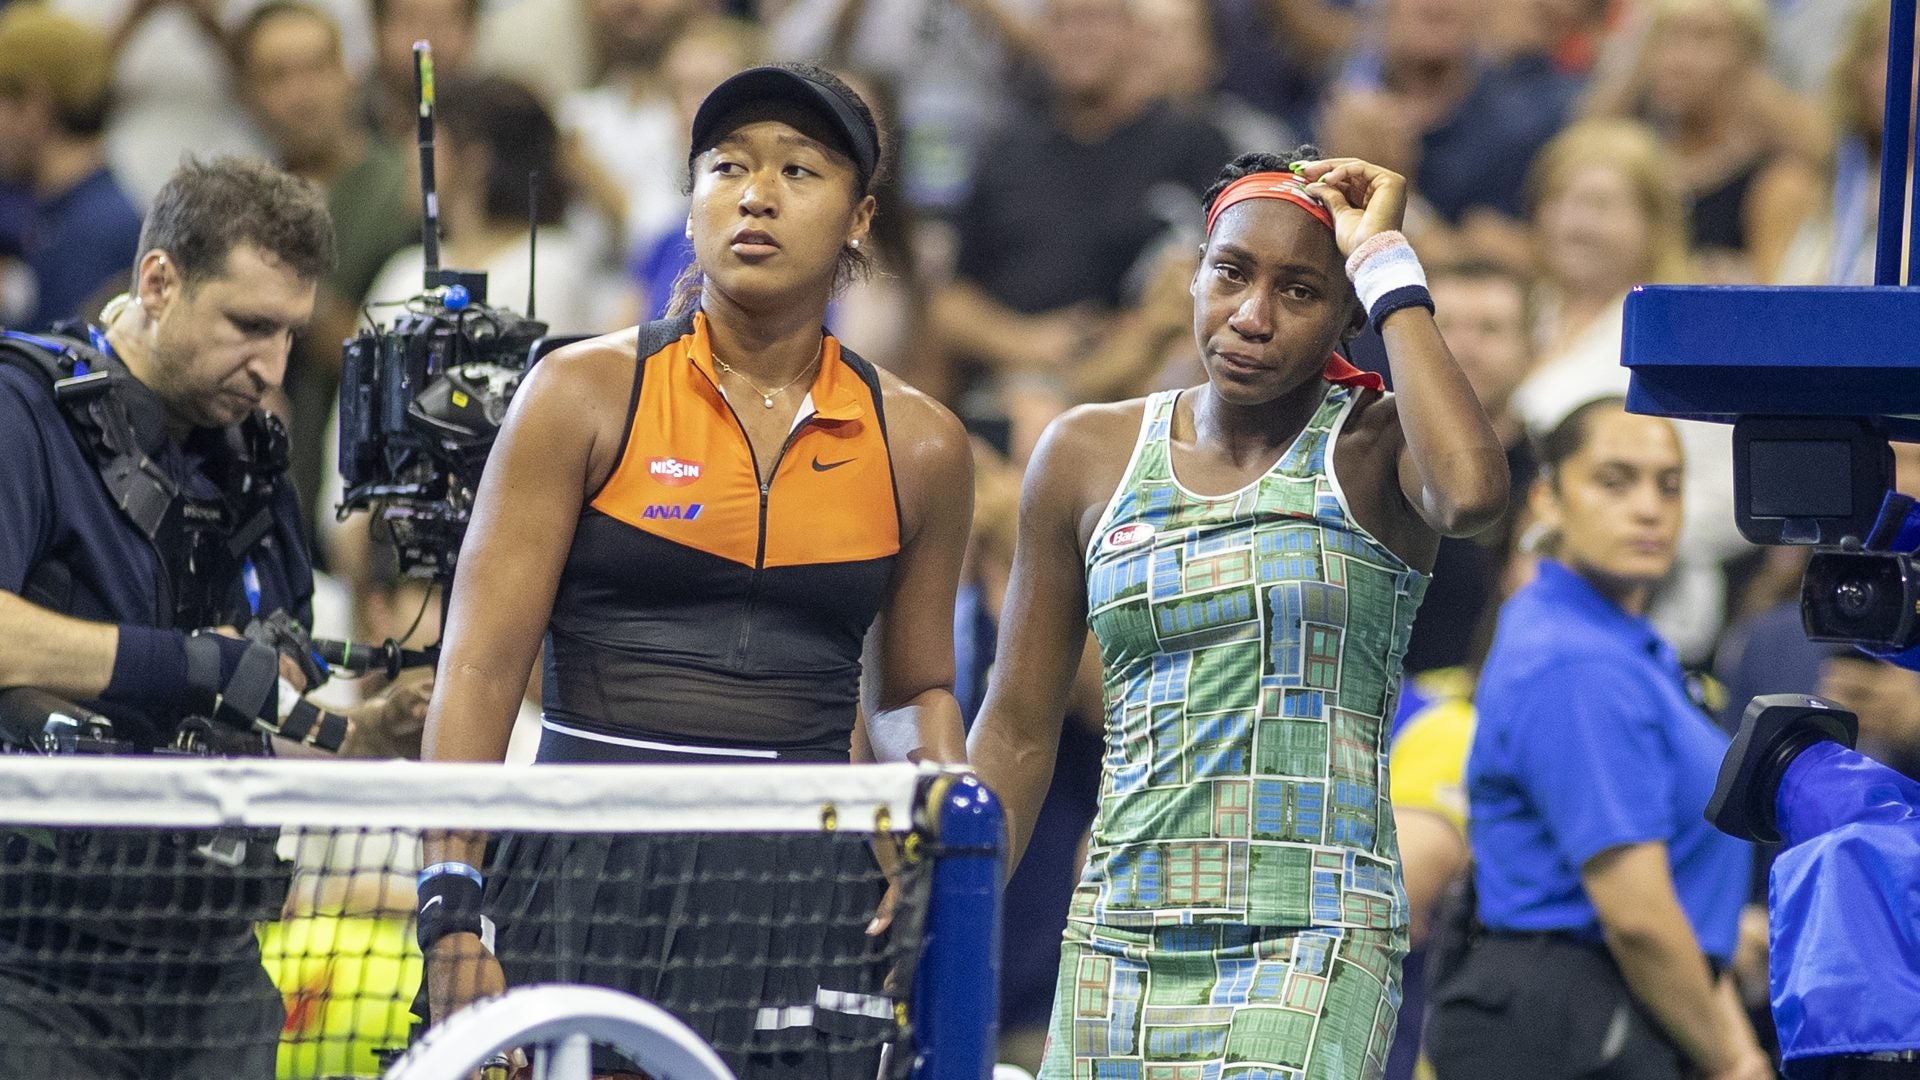 We Can't Get Over This U.S. Open Moment Between Naomi Osaka And Coco Gauff